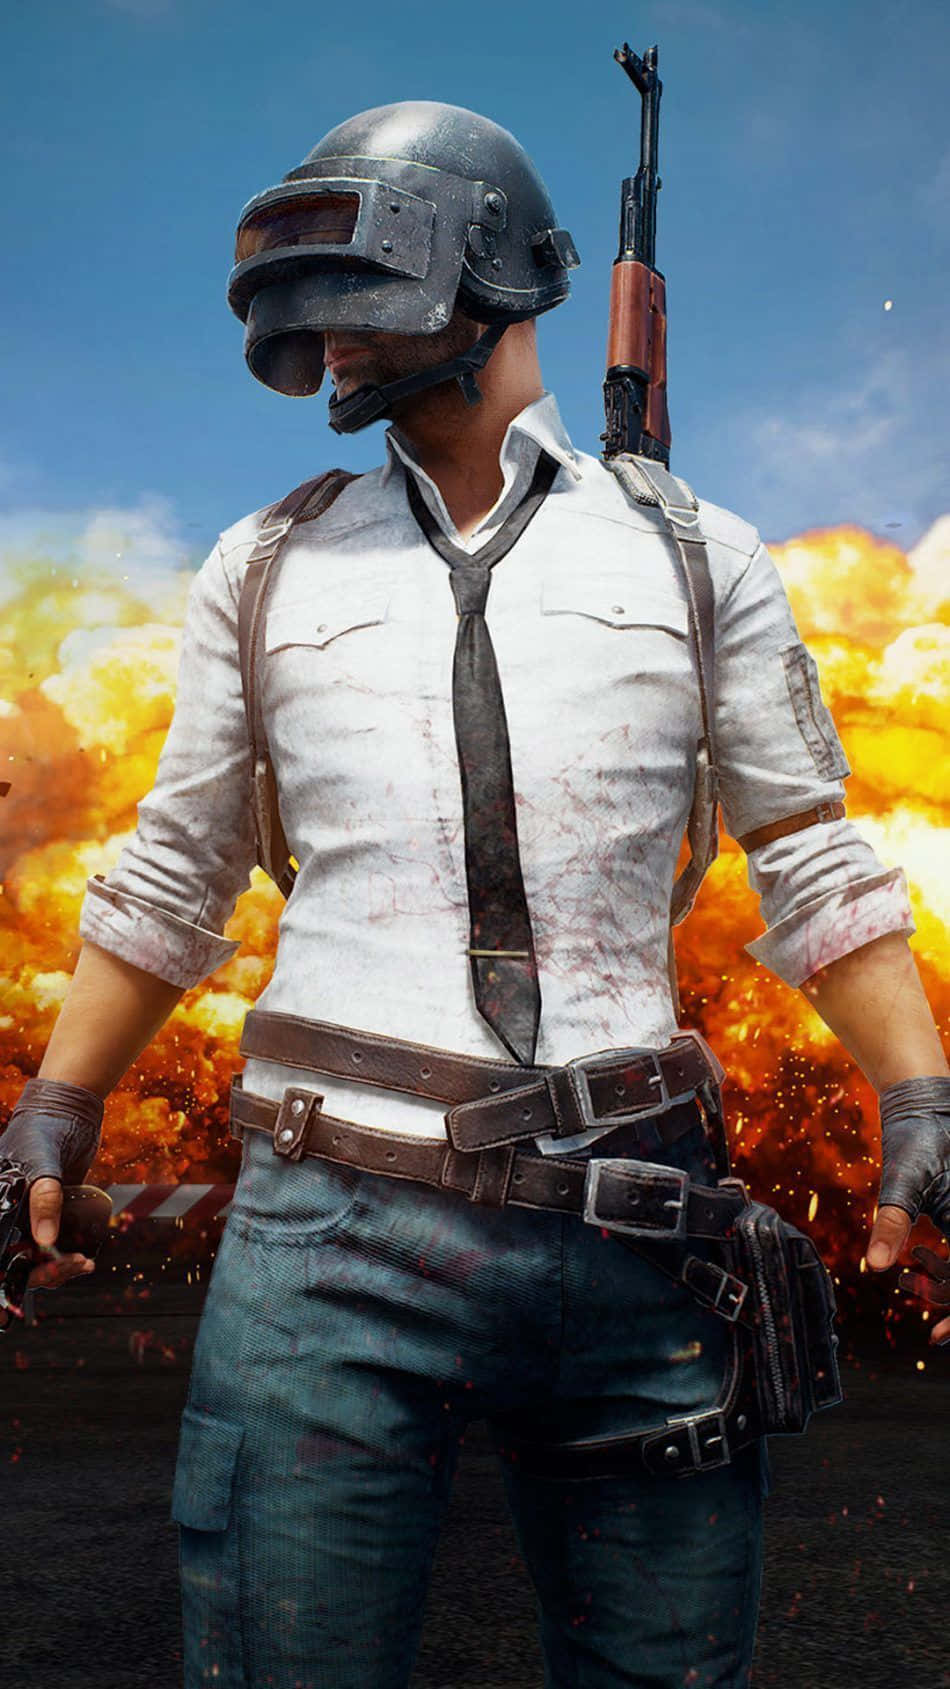 Epic Battlefield - Pubg Mobile Game Action Background